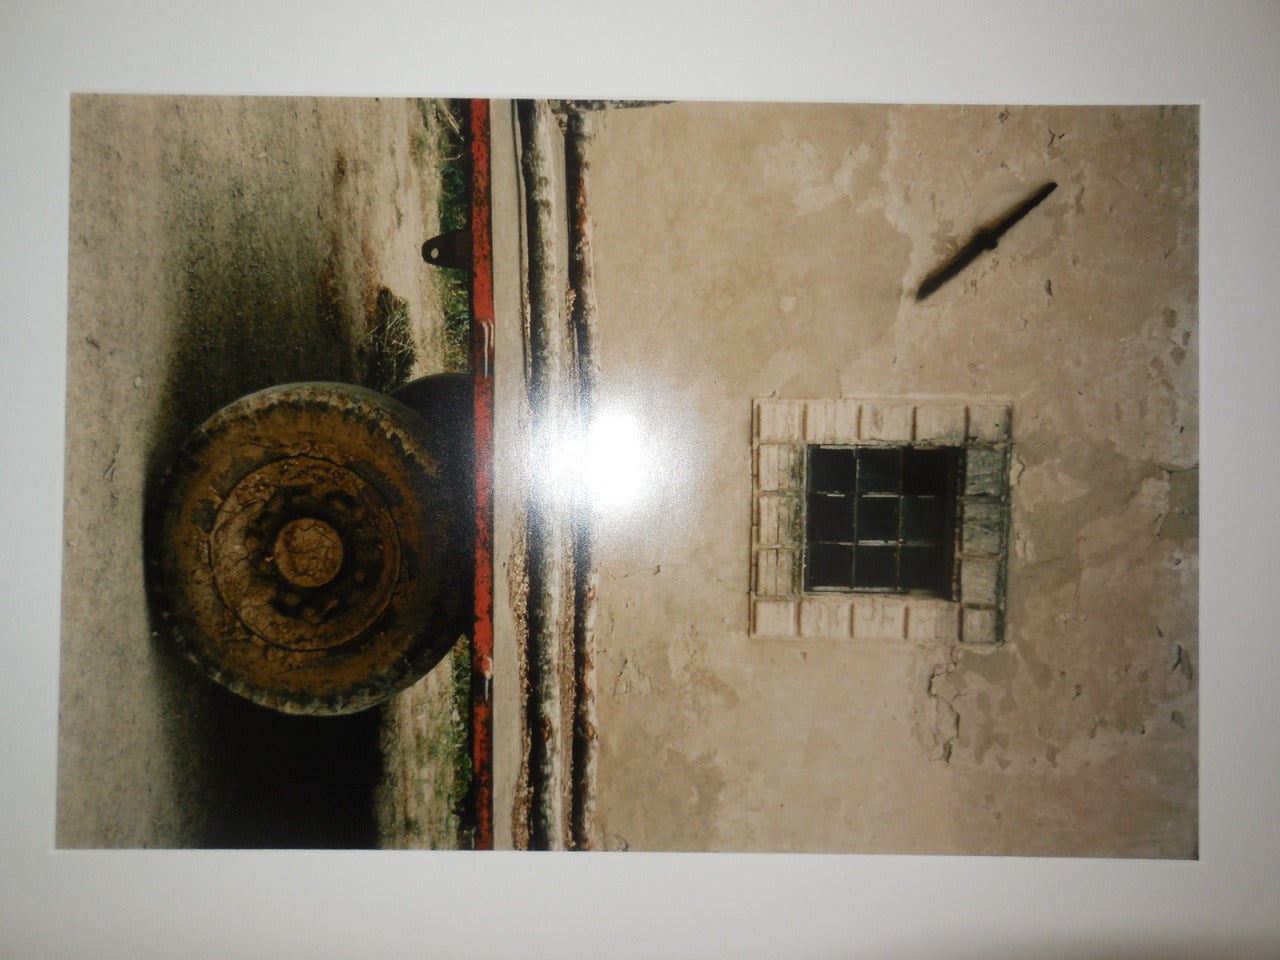 Tuscany, Window, 1996 Large Vintage Color Photograph C Print Signed 4